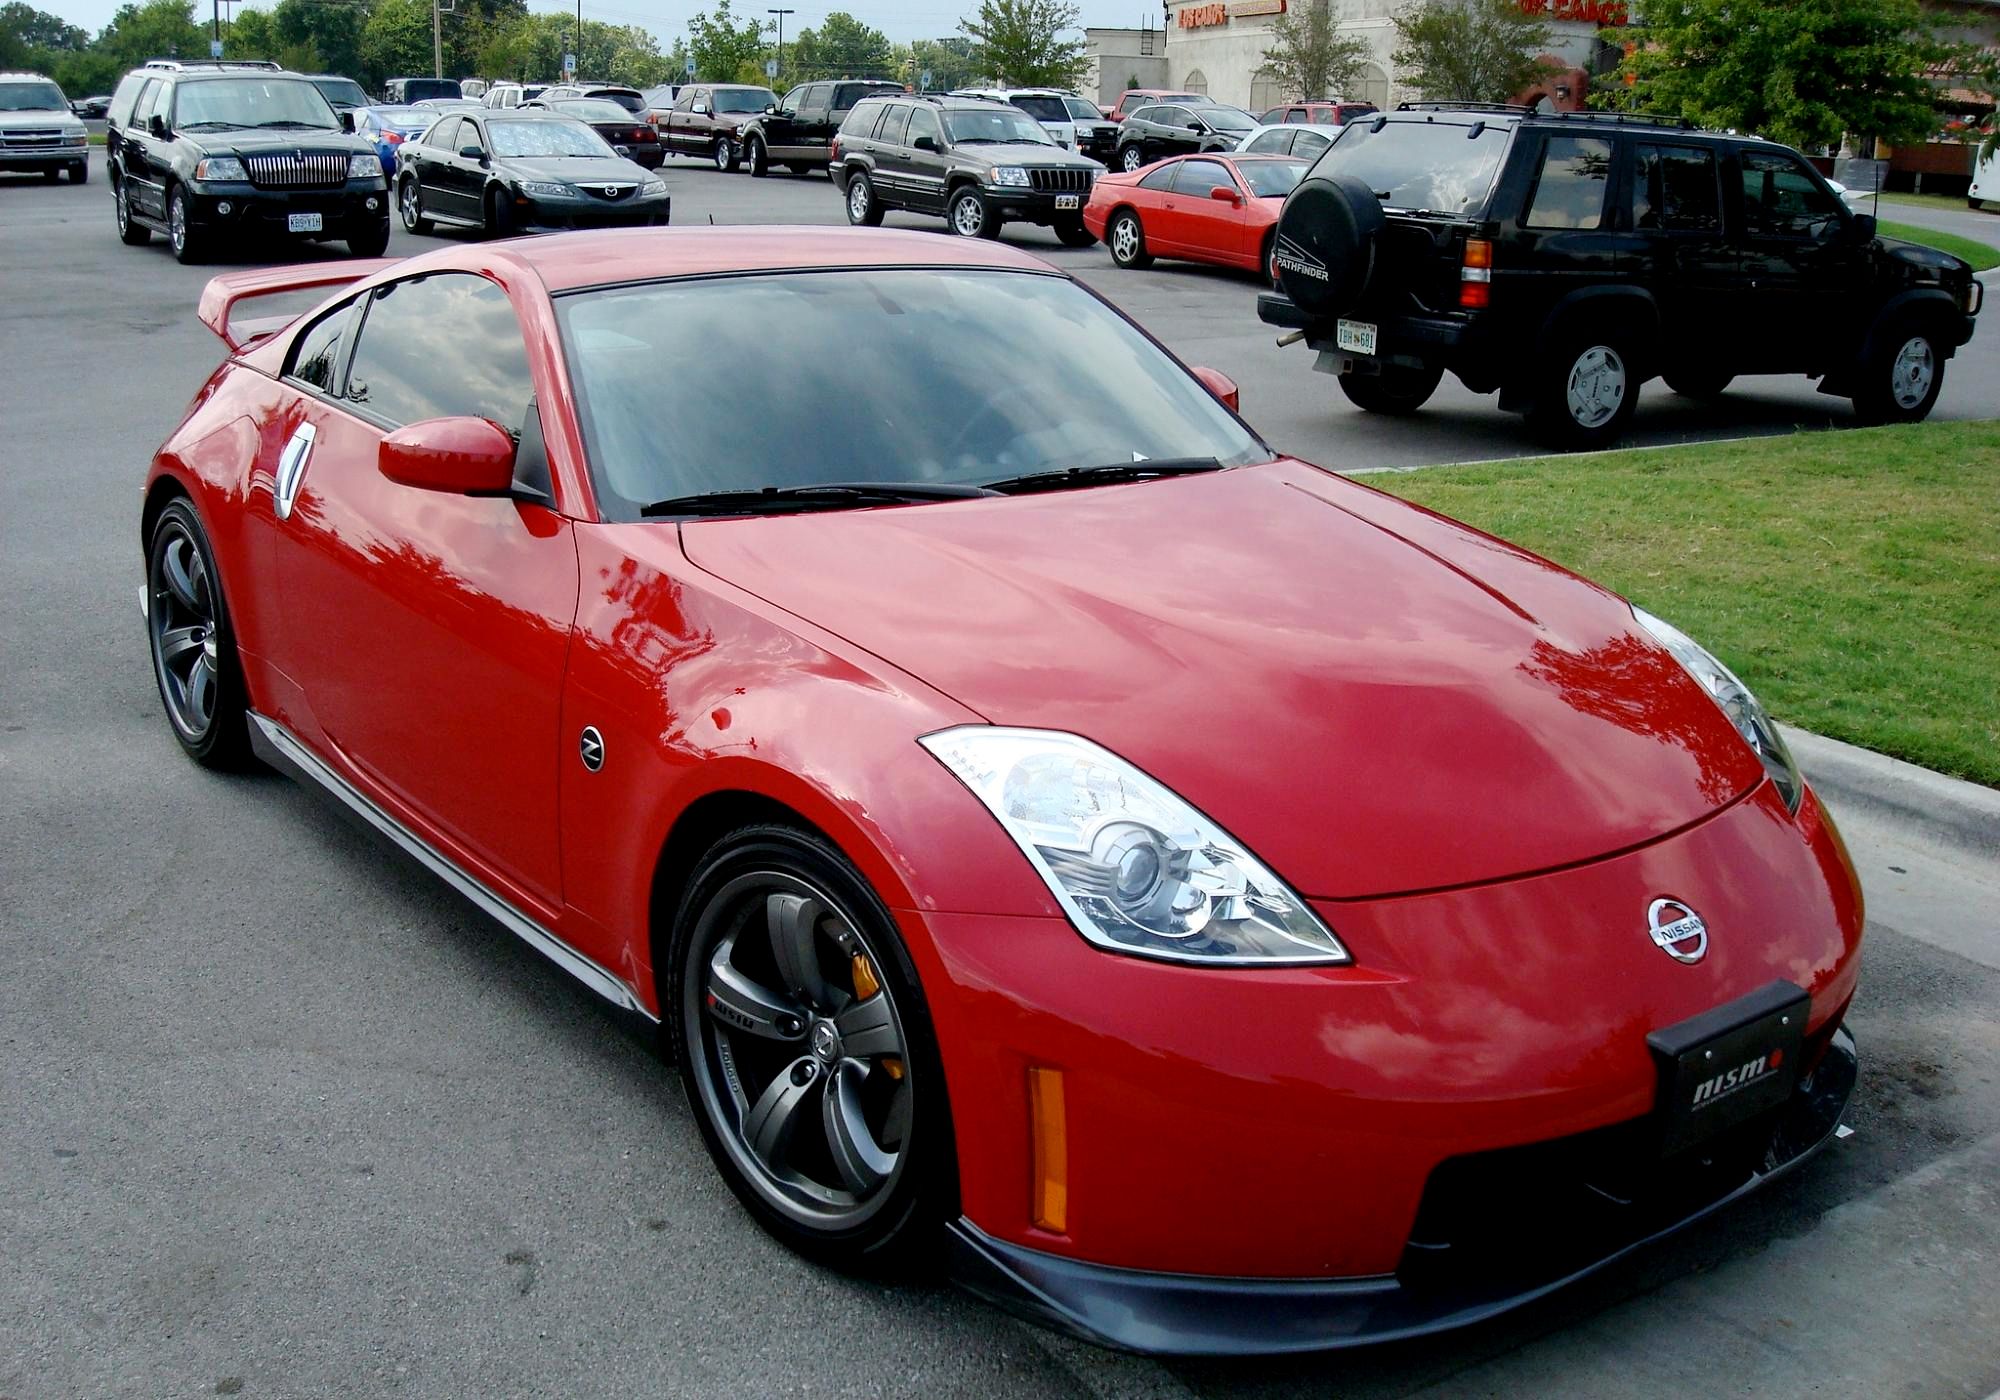 Red 2007-08 Nismo 350Z